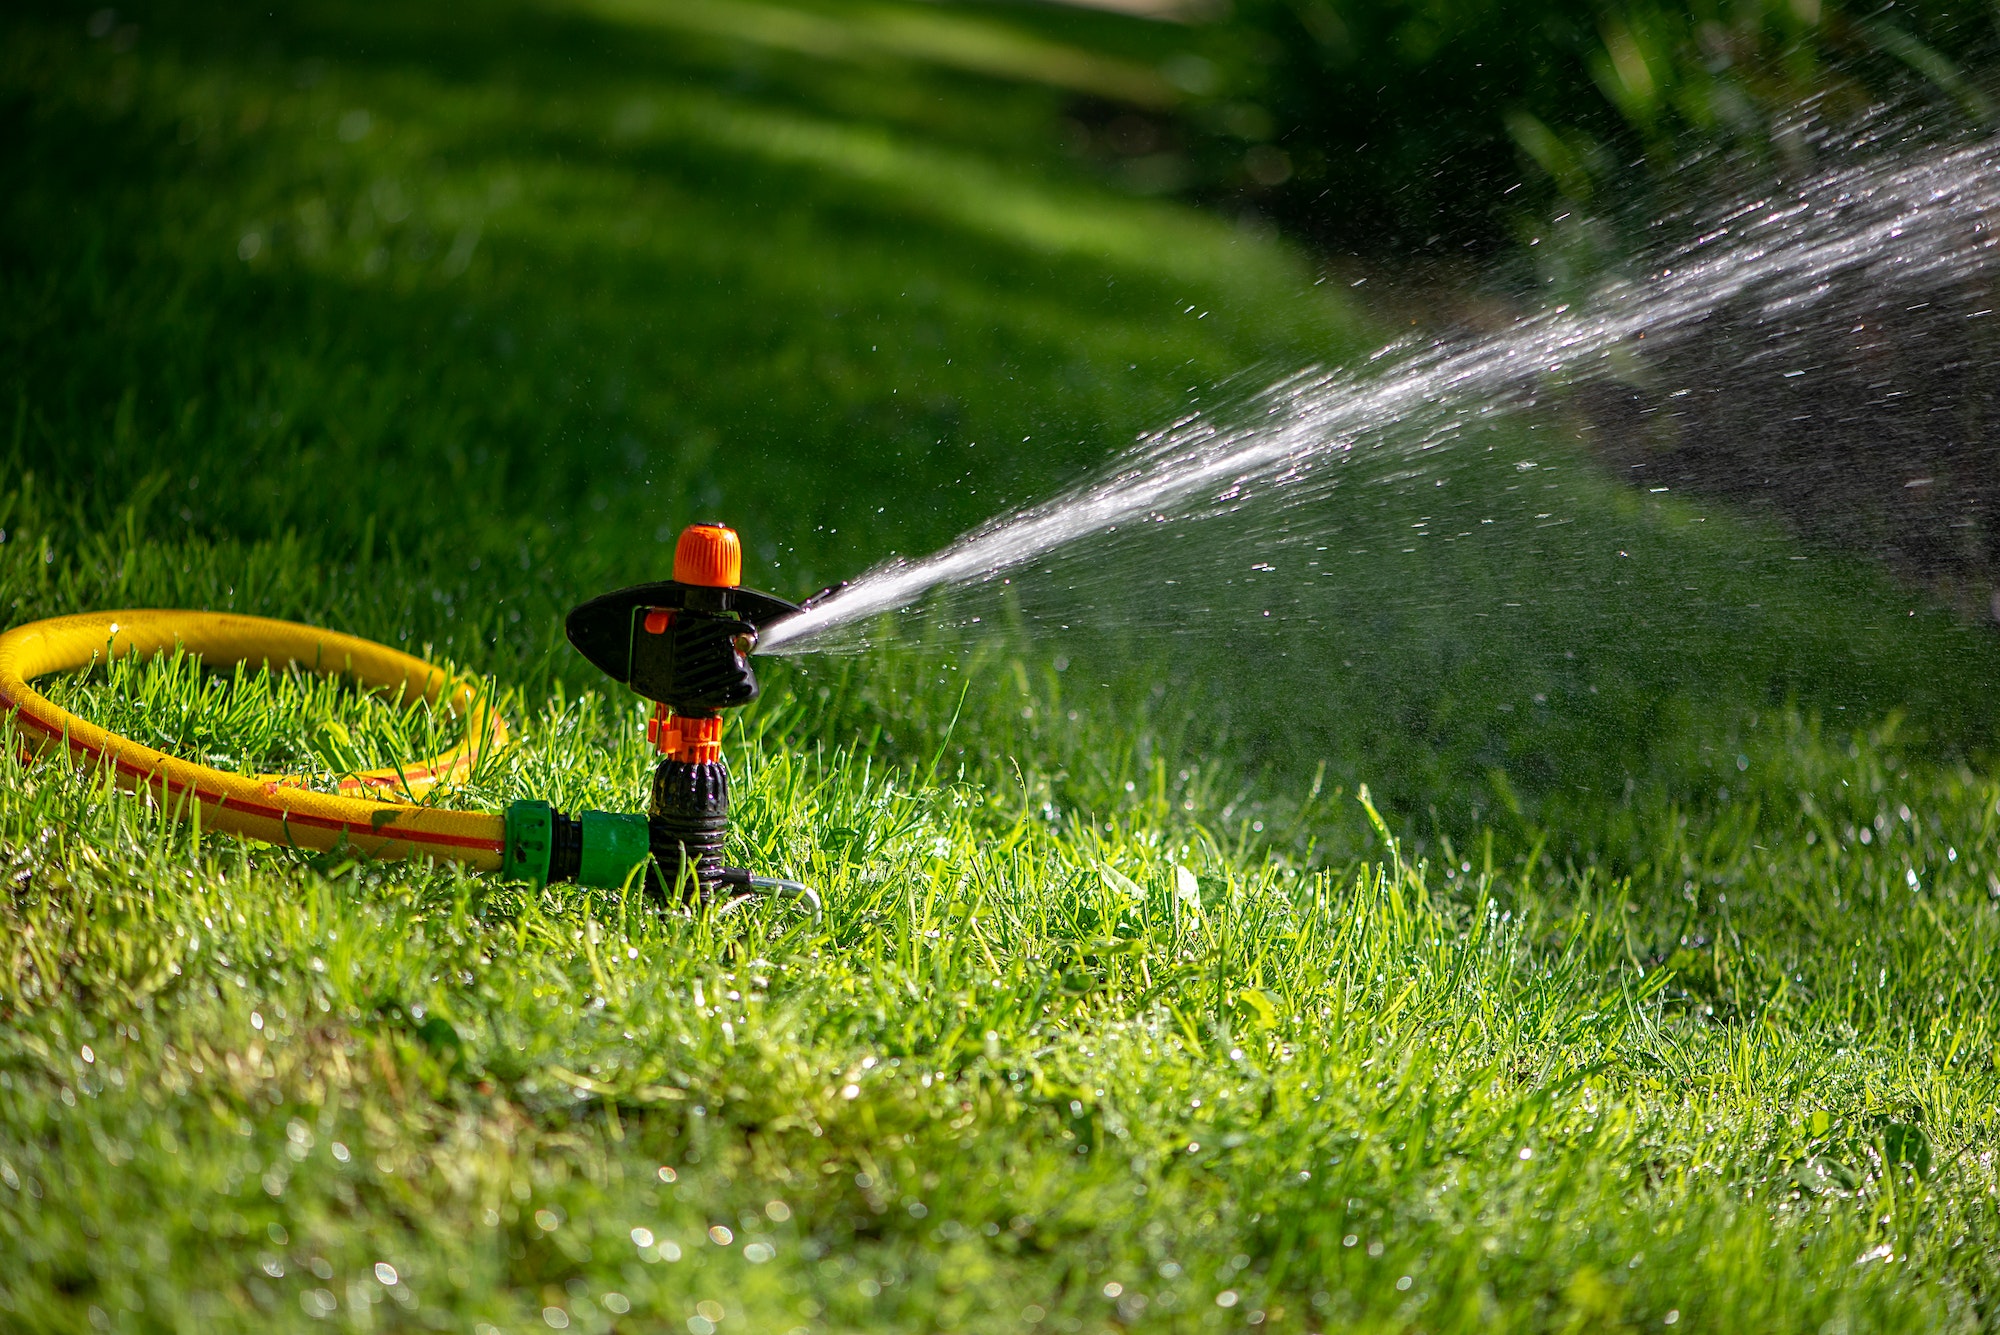 Automatic sprinkler system watering the lawn.Watering in the garden. Watering garden plants.